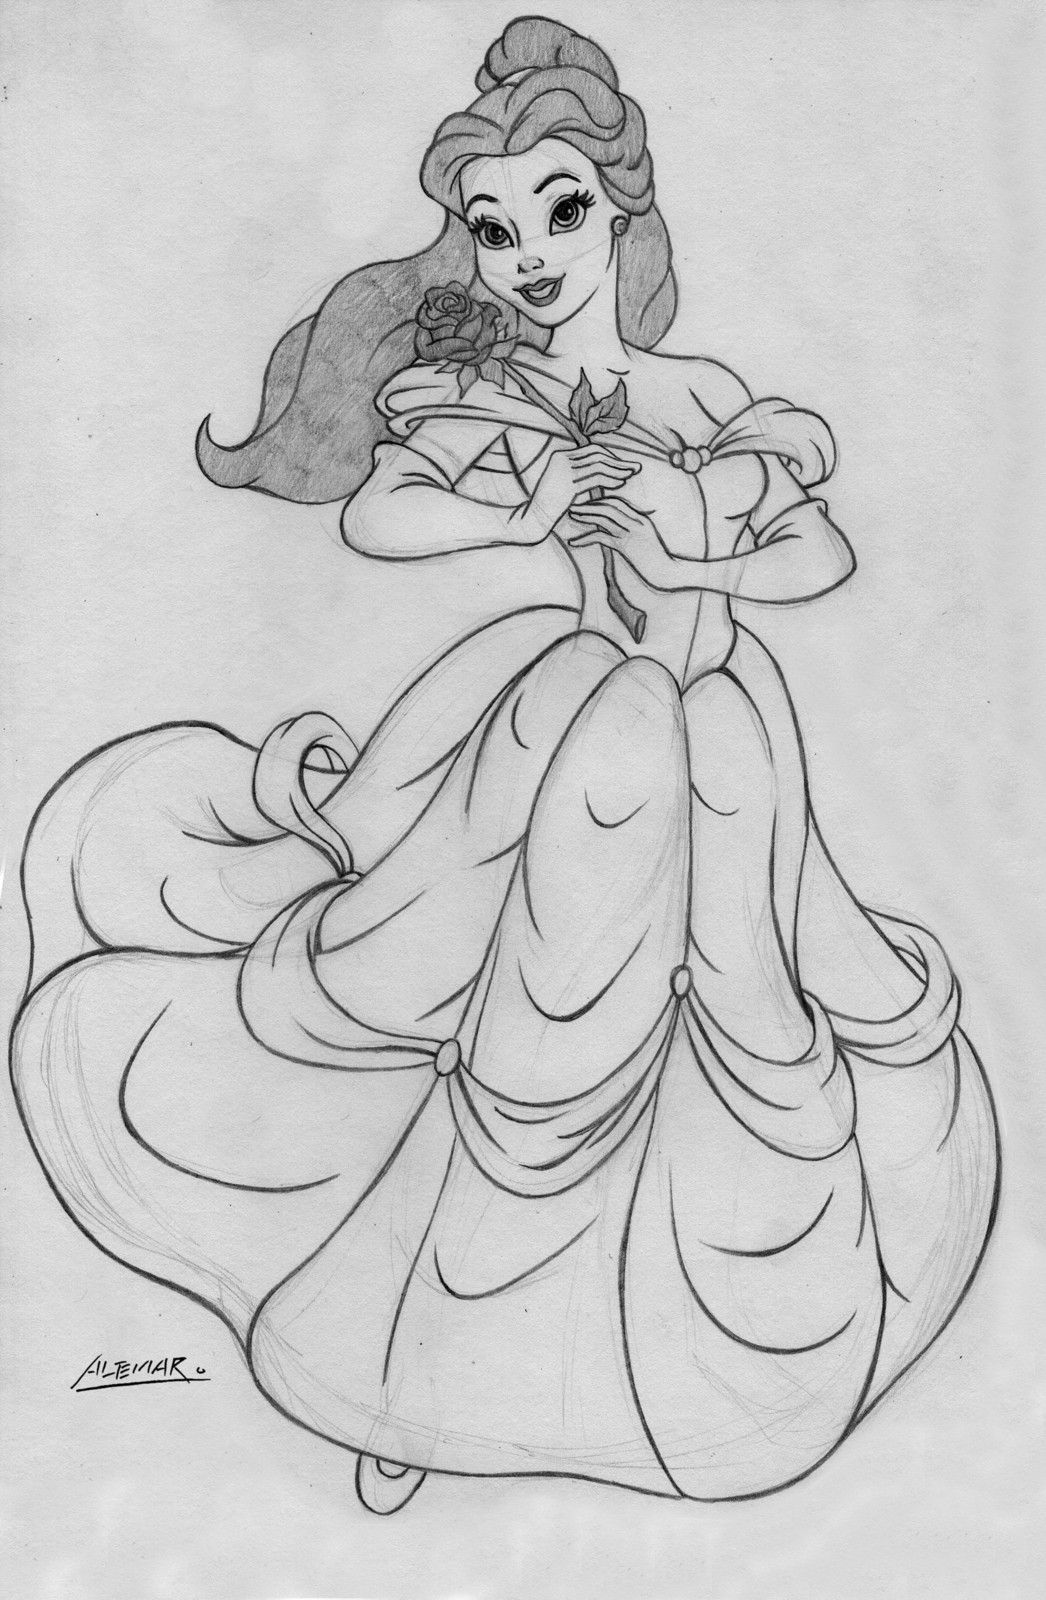 Belle -  Sketch with pencil